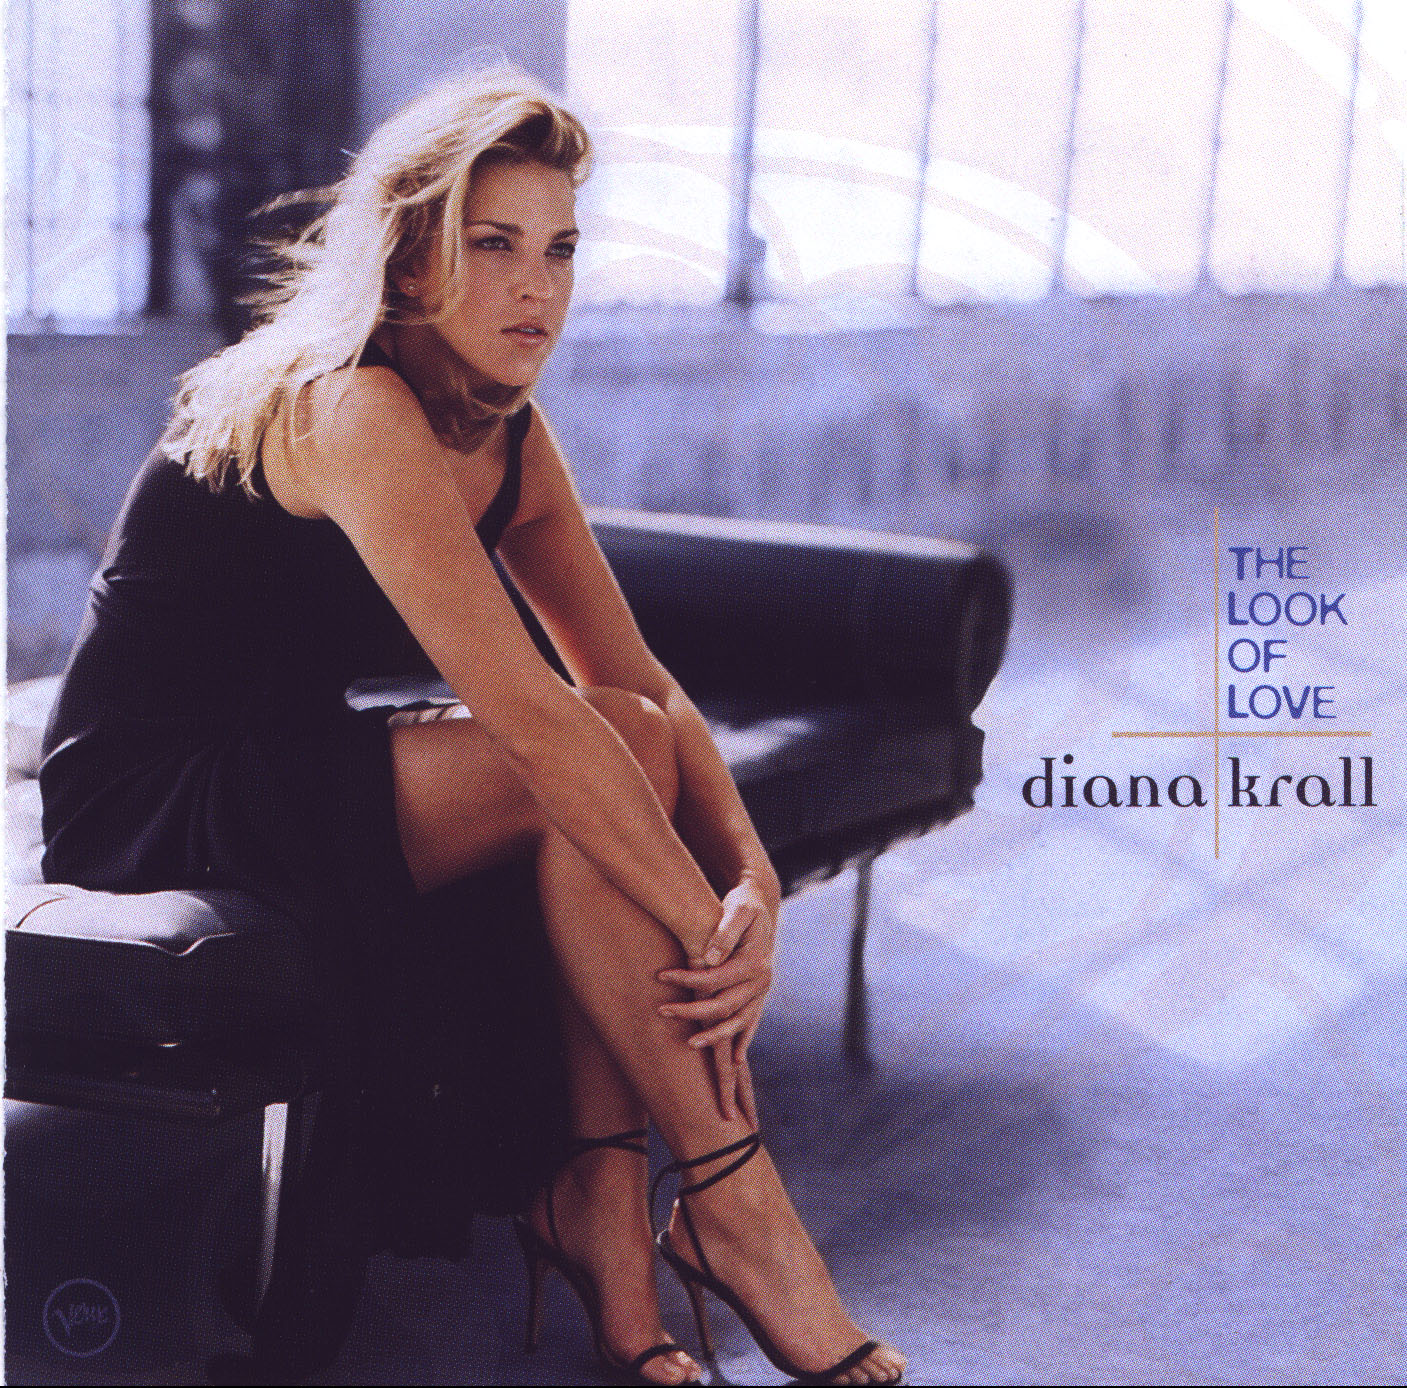 Diana Krall - The Look Of Love - YouTube